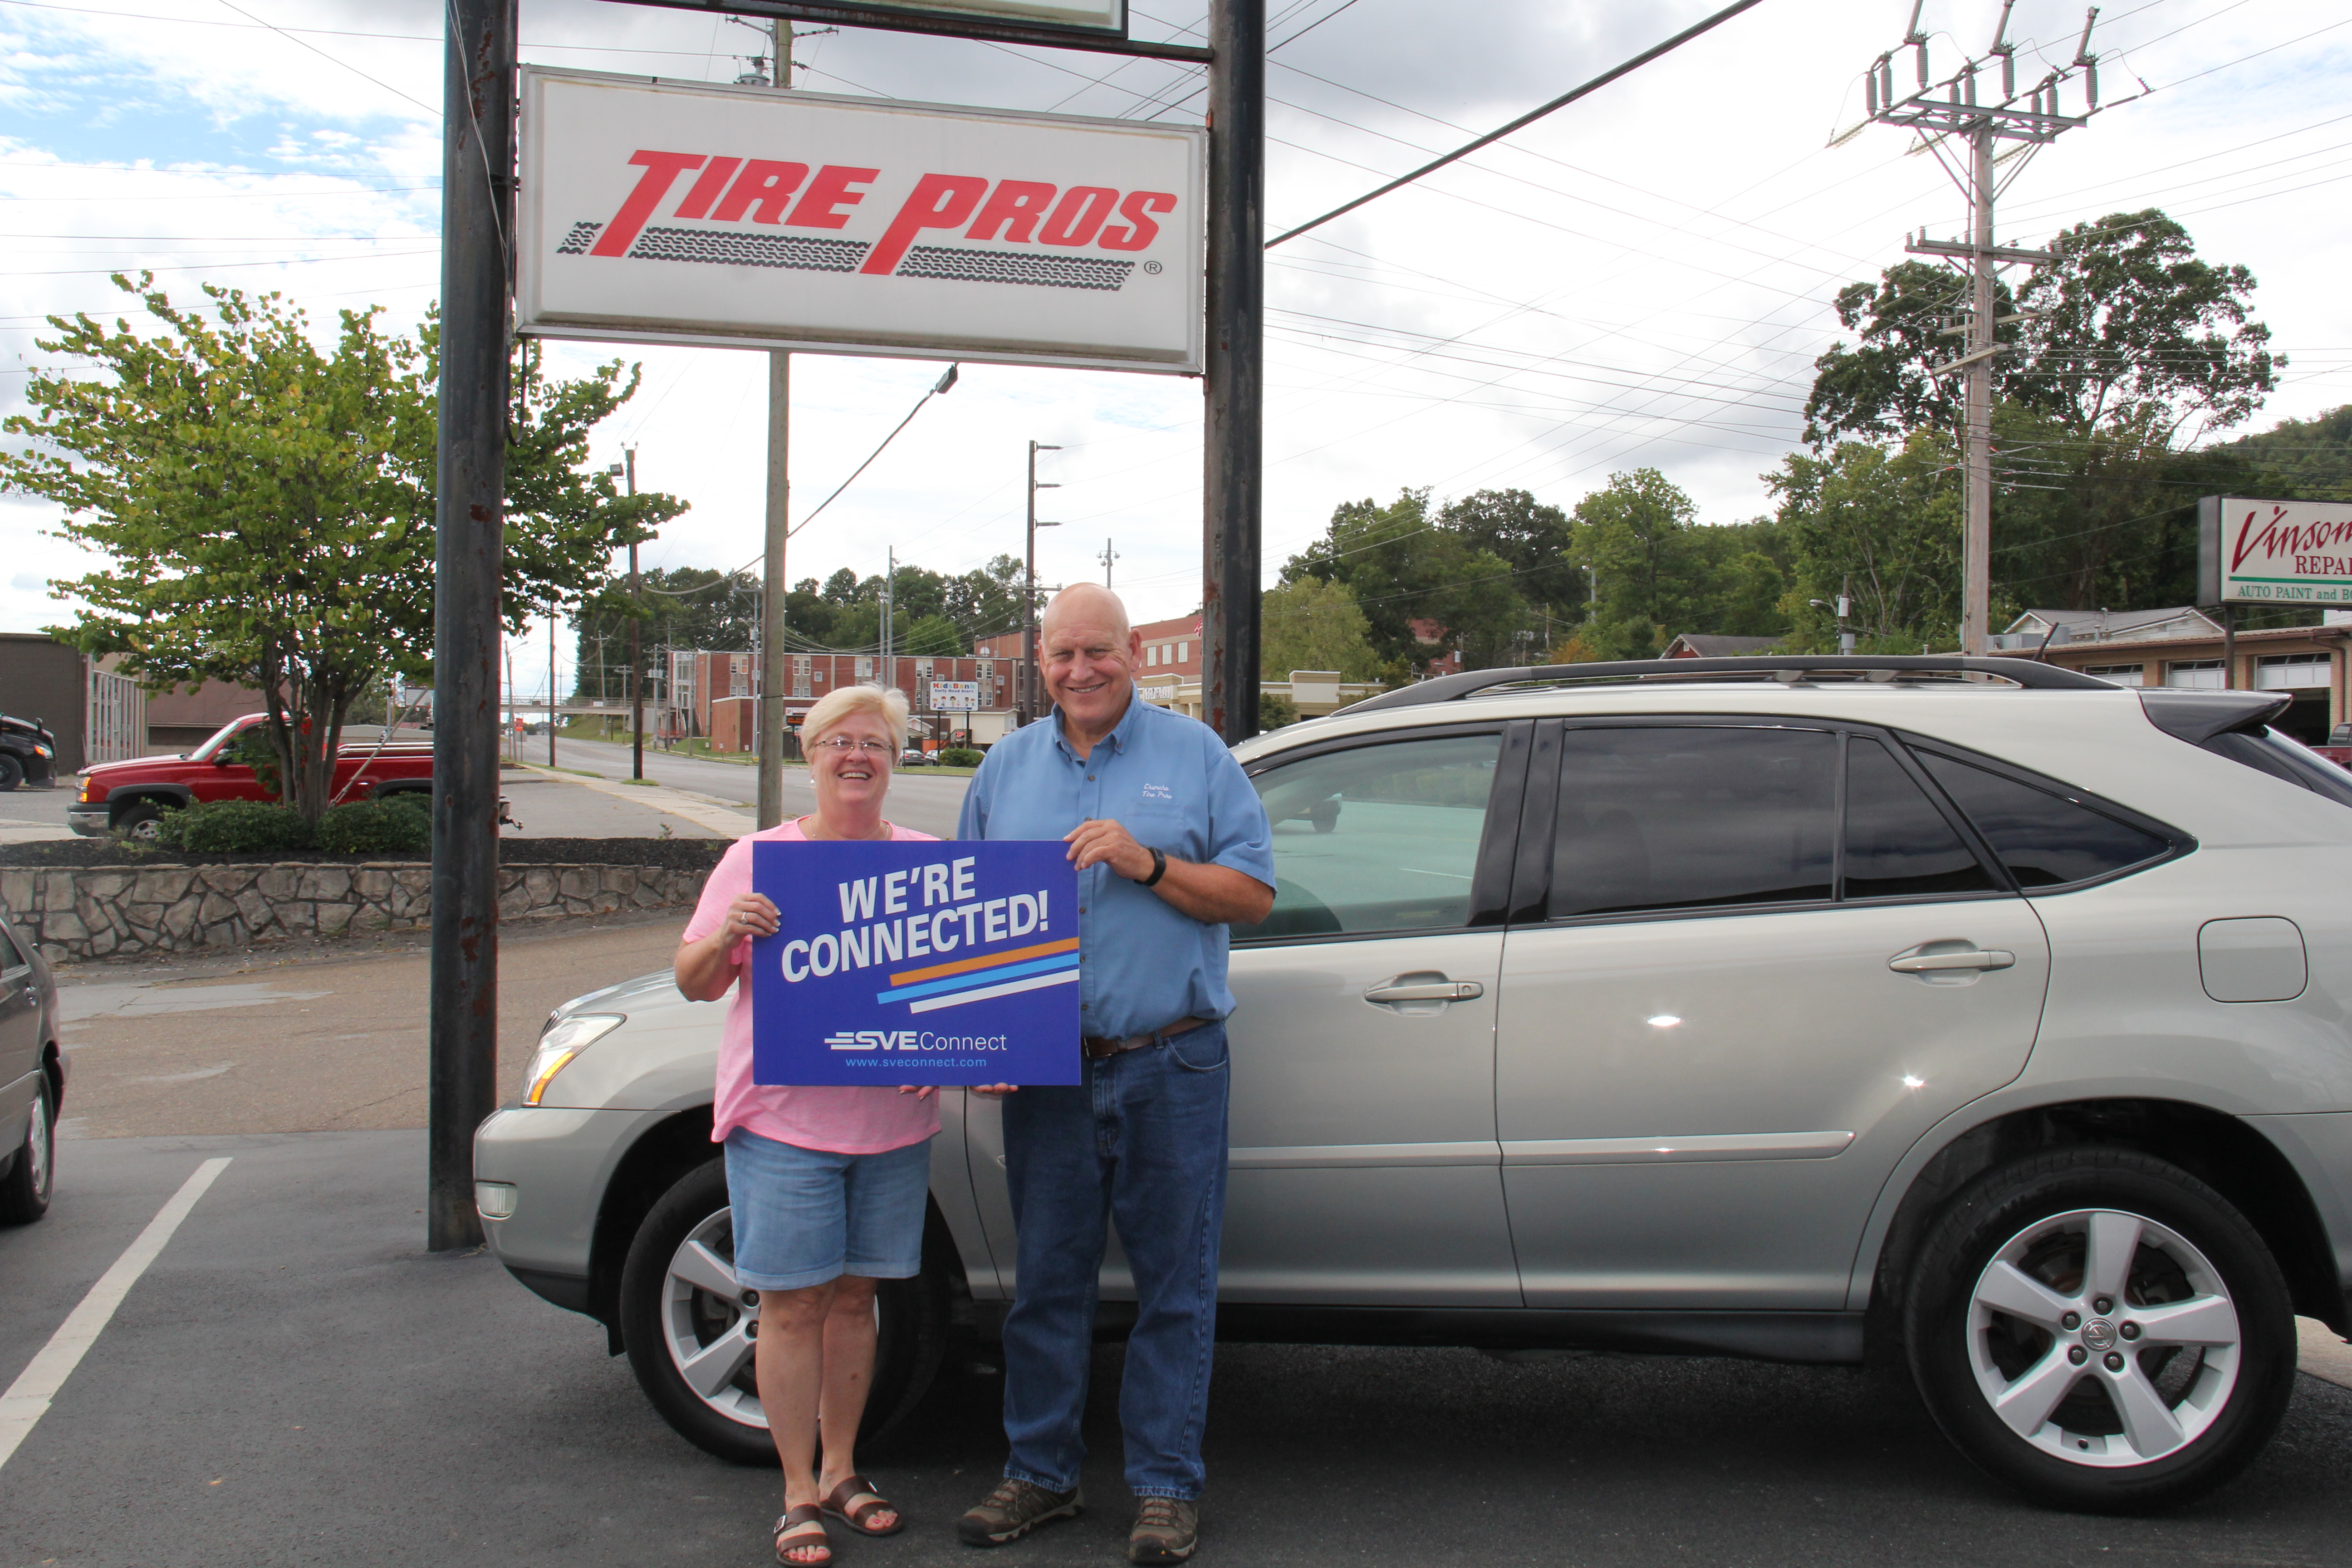 Terri and James Church at Church's Tire Pros are Connected